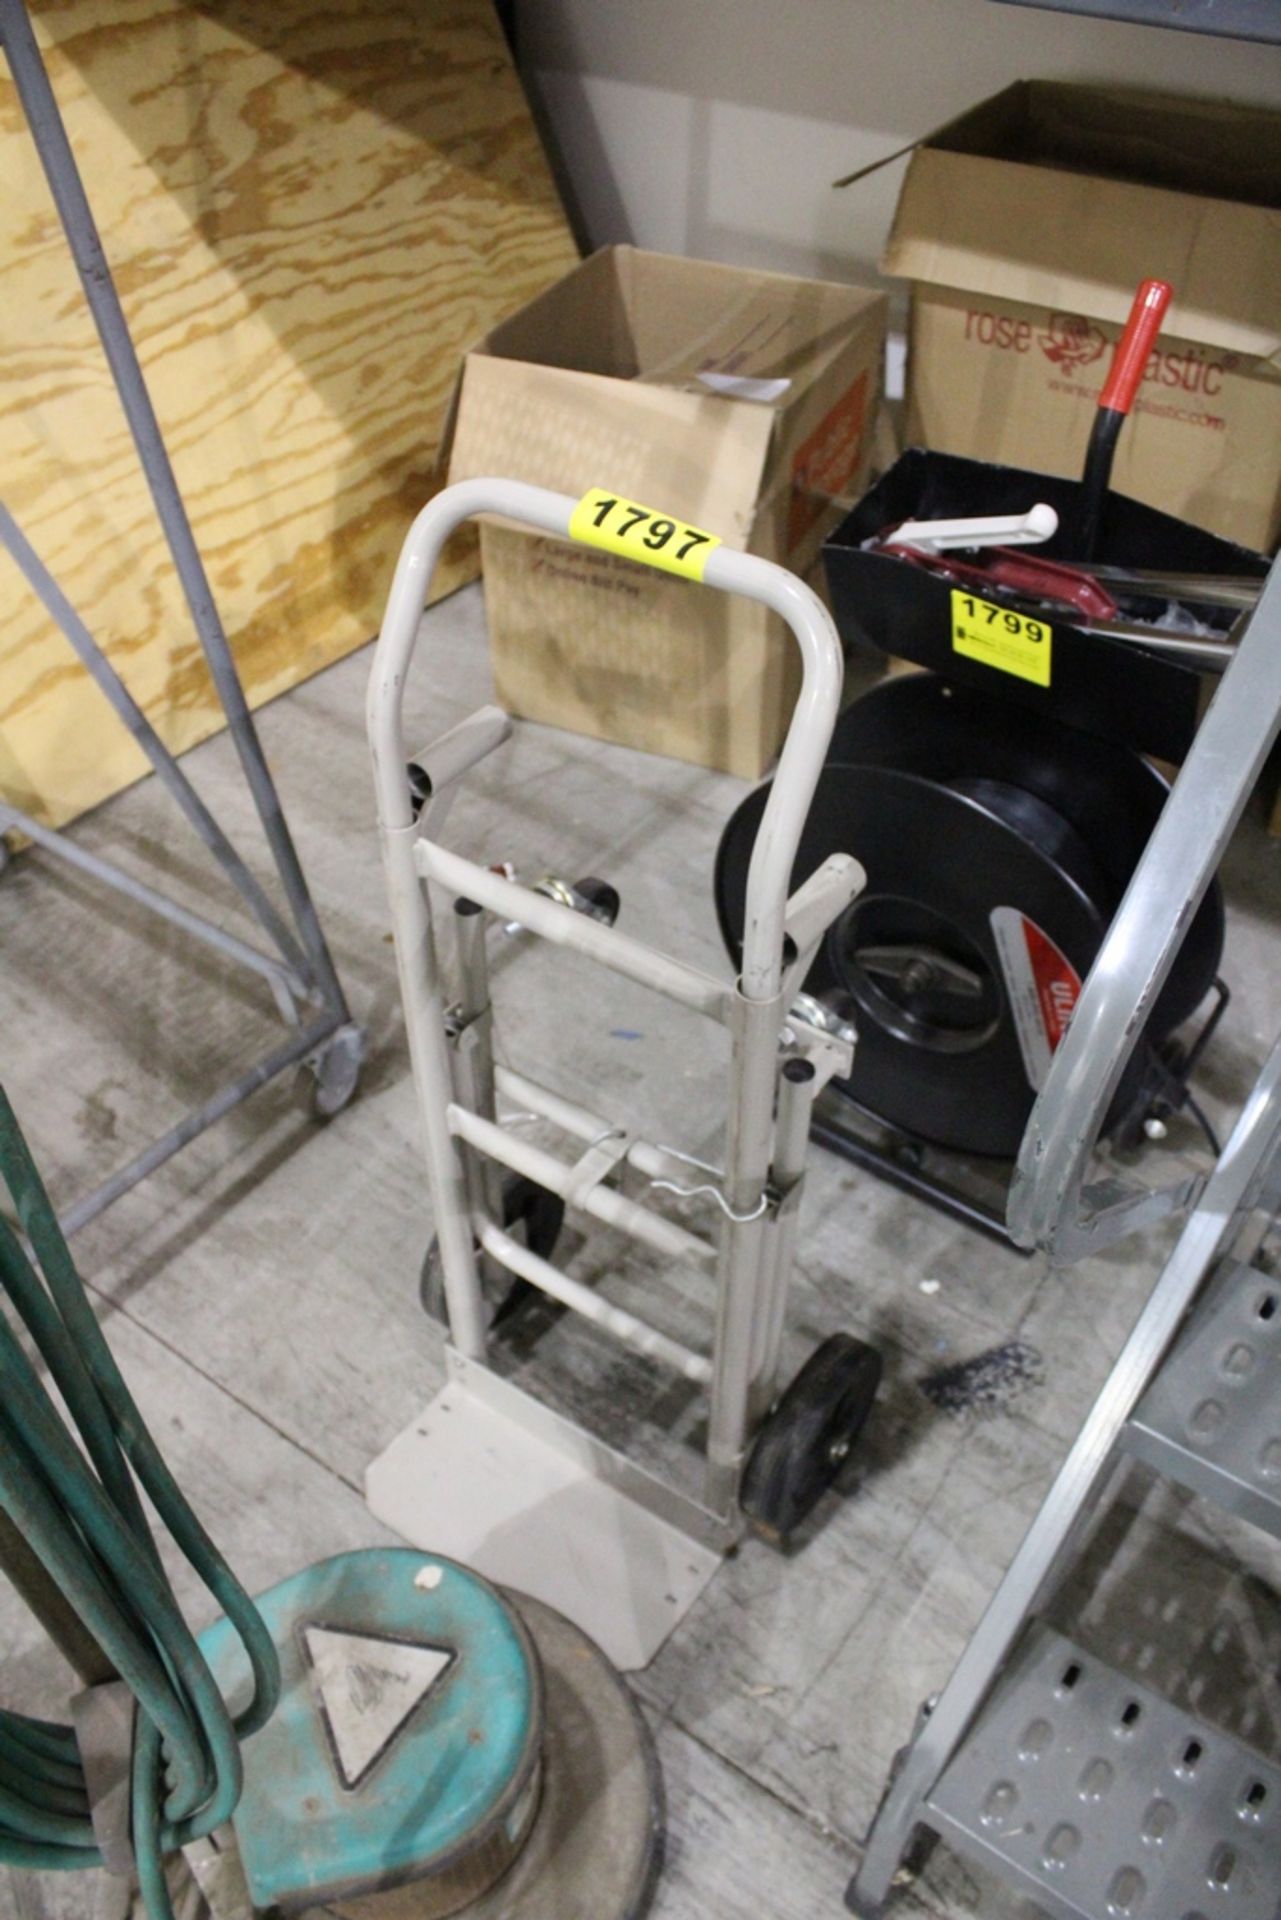 TWO POSITION HAND CART